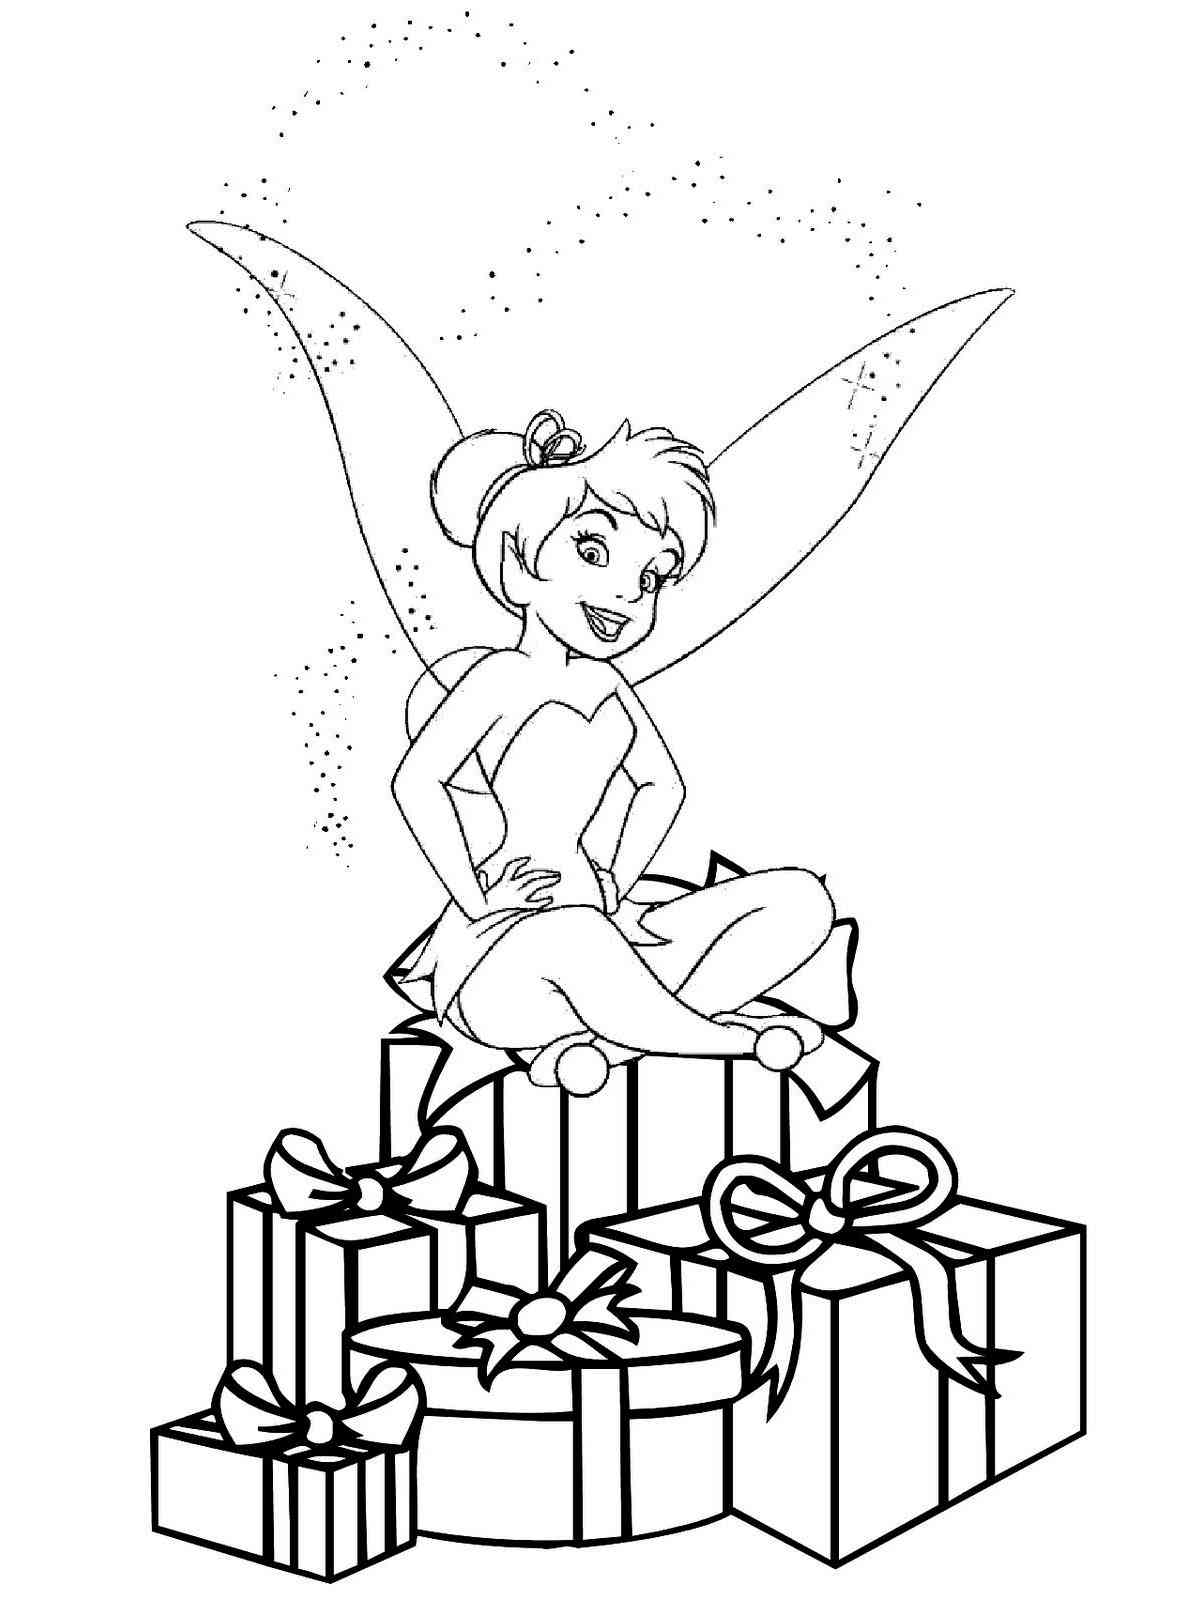 Disney Christmas 3 coloring page